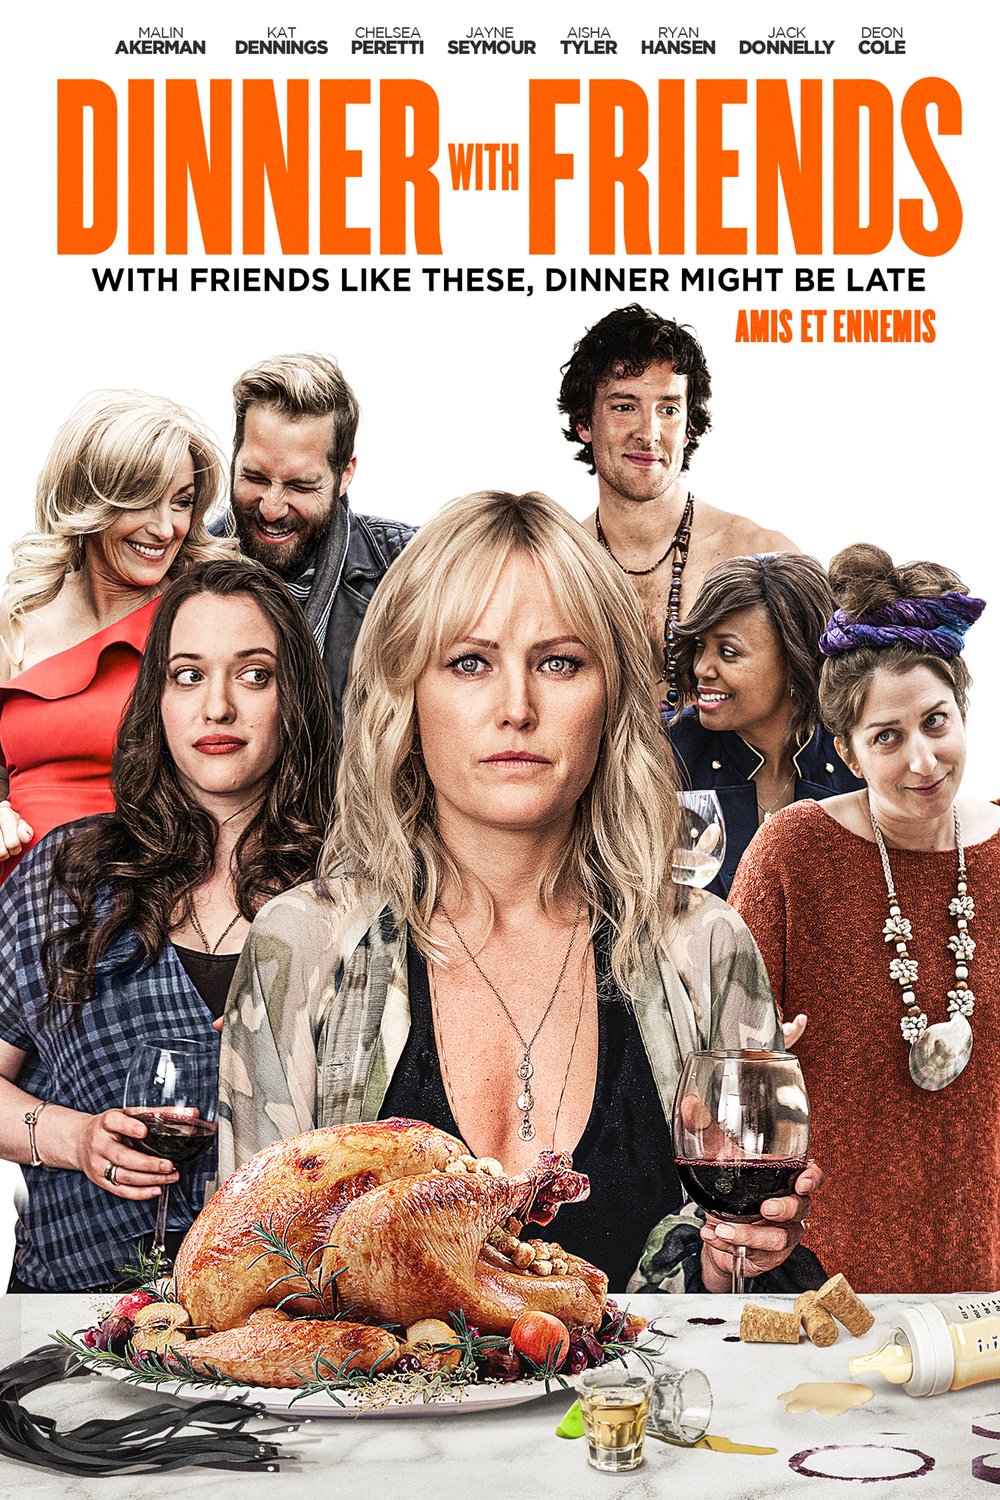 Poster of the movie Friendsgiving